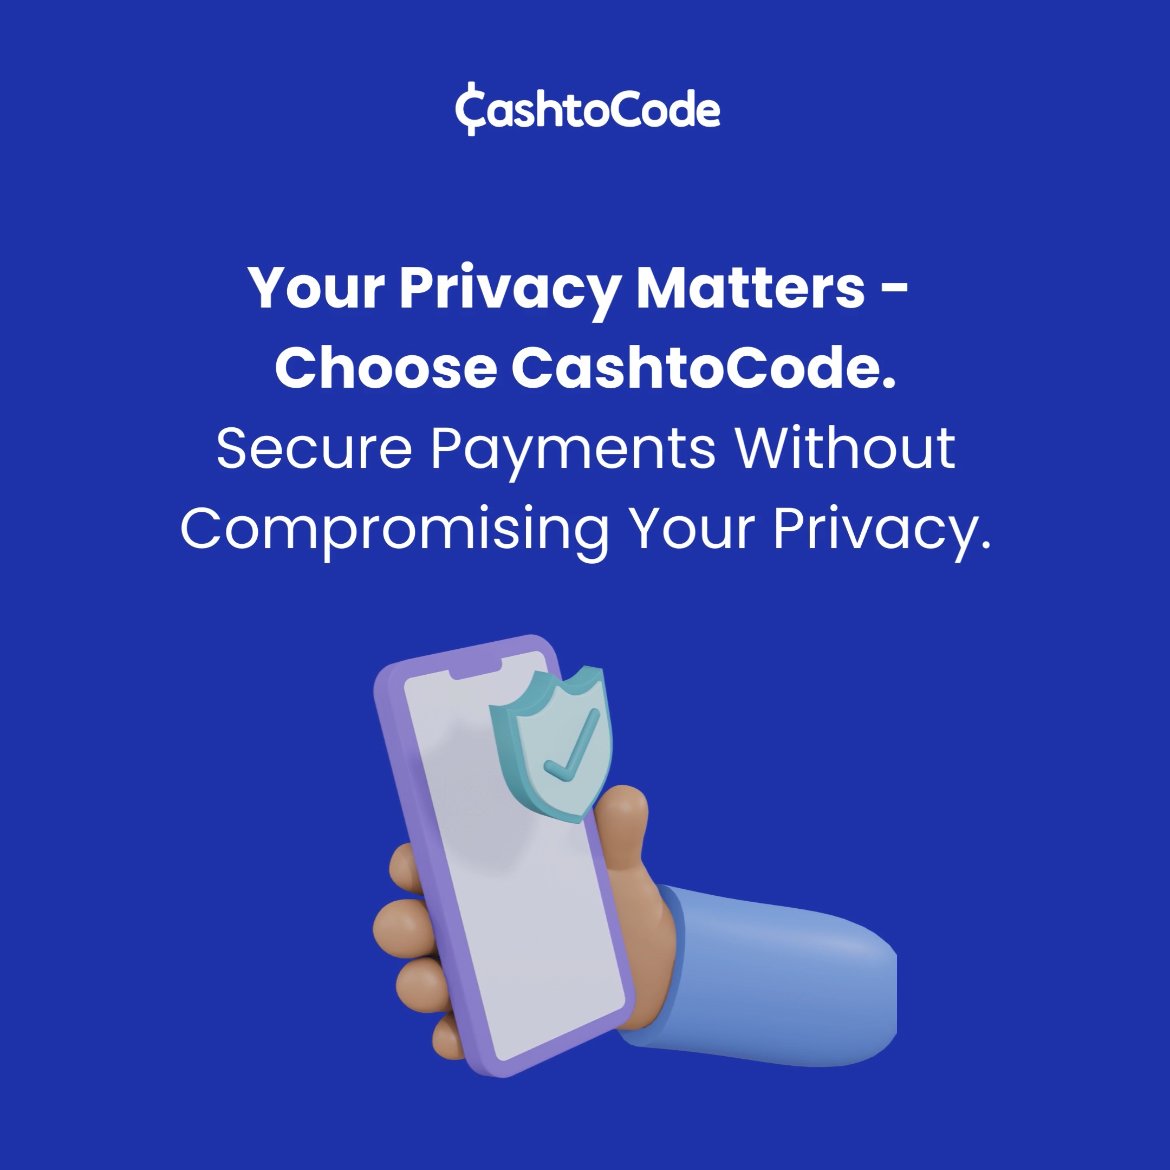 Your privacy is non-negotiable. Choose CashtoCode for secure payments without compromising personal information. Your data, your control.

Protect your privacy with every transaction!
🔗cashtocode.com
#PrivacyMatters #SecurePayments #CashtoCodePrivacy